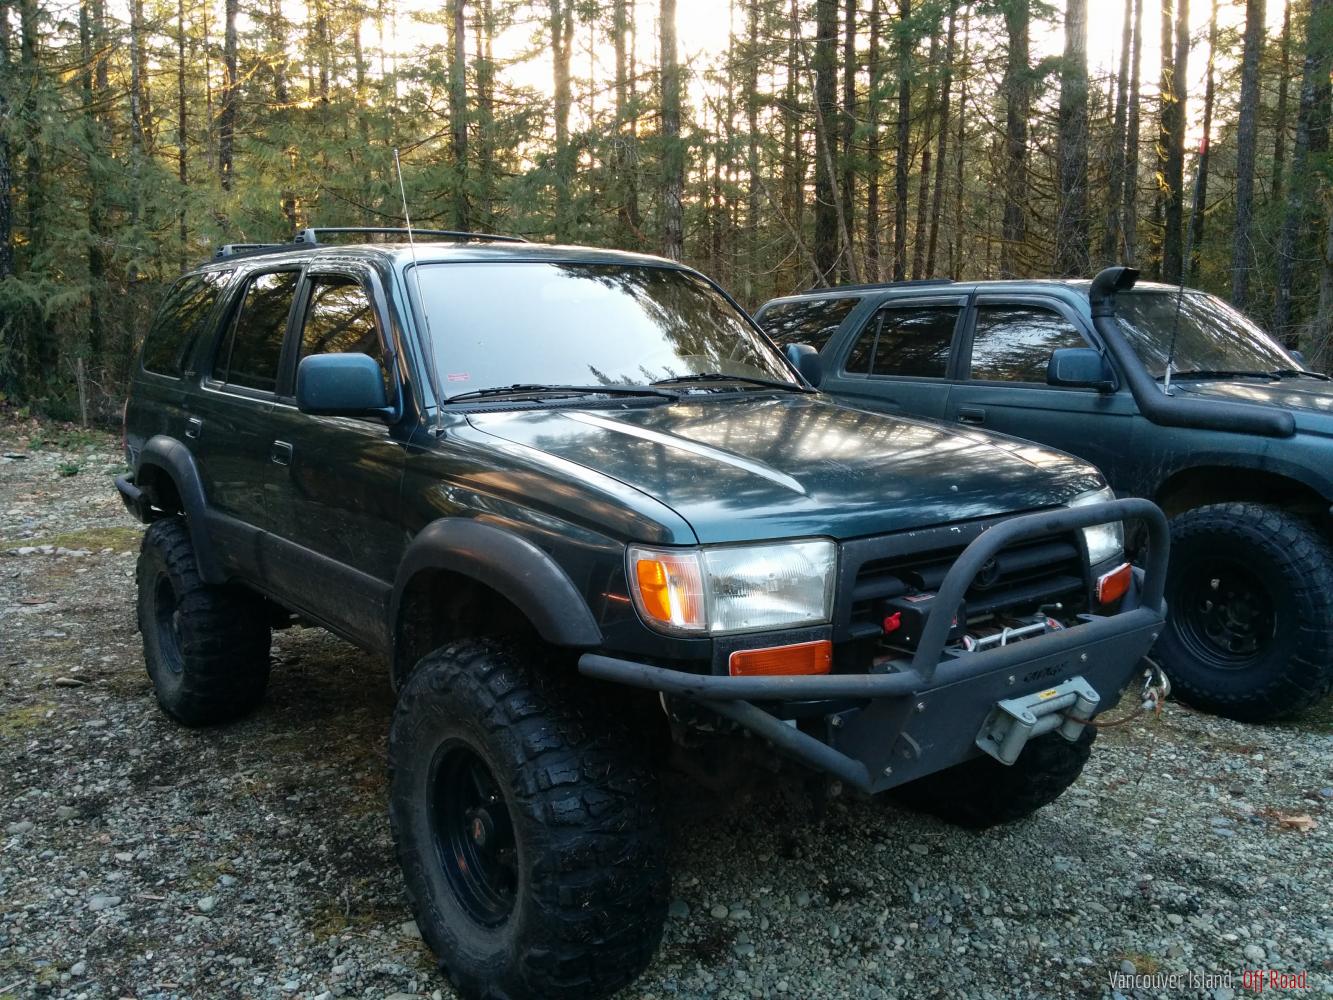 Theshanergys 96 Toyota 4runner Vancouver Island Off Road